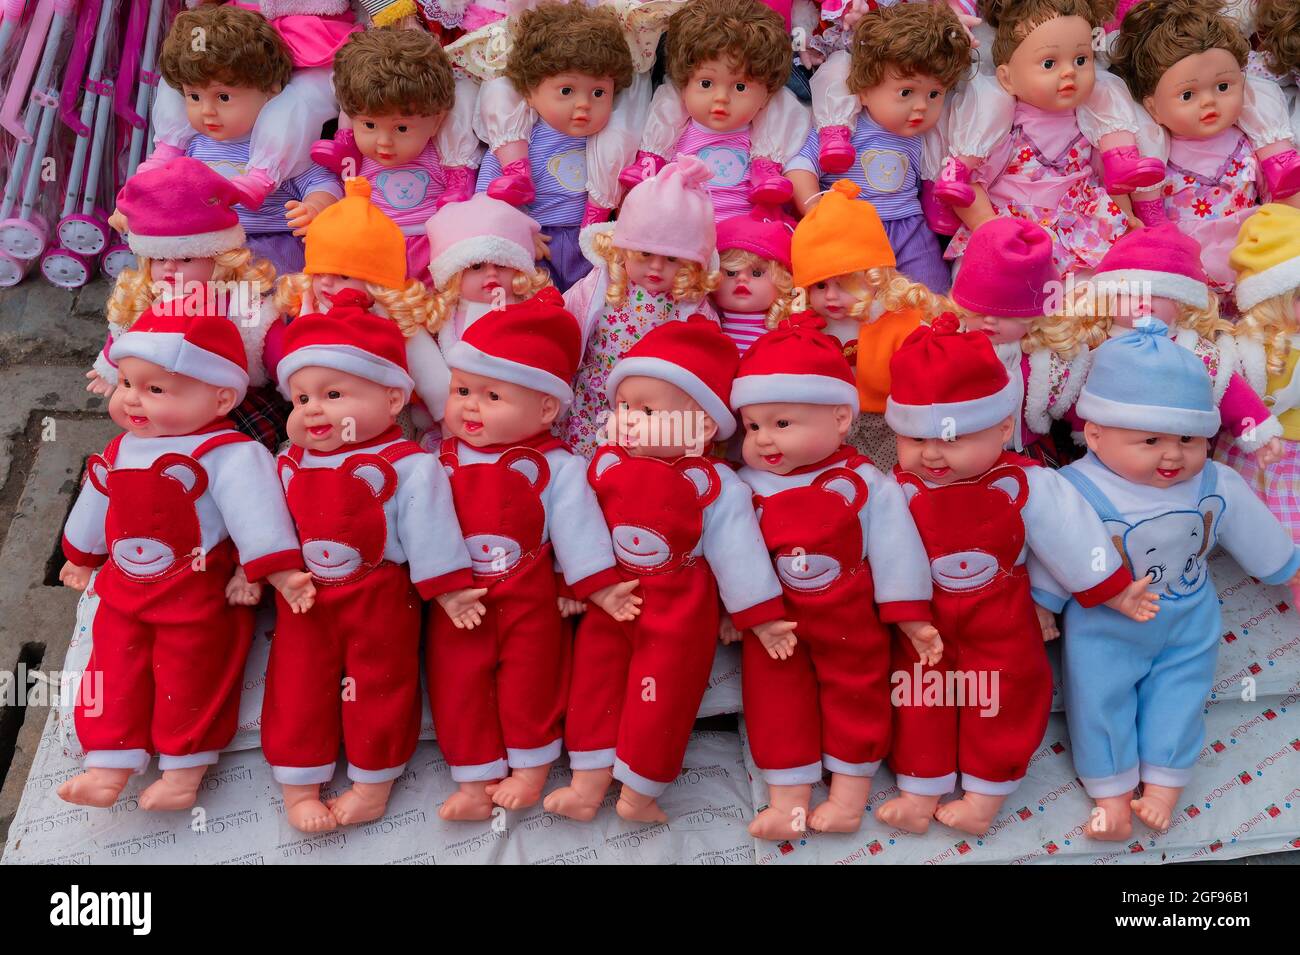 Beautiful cute baby dolls for sale at retail shop at Christmas ...